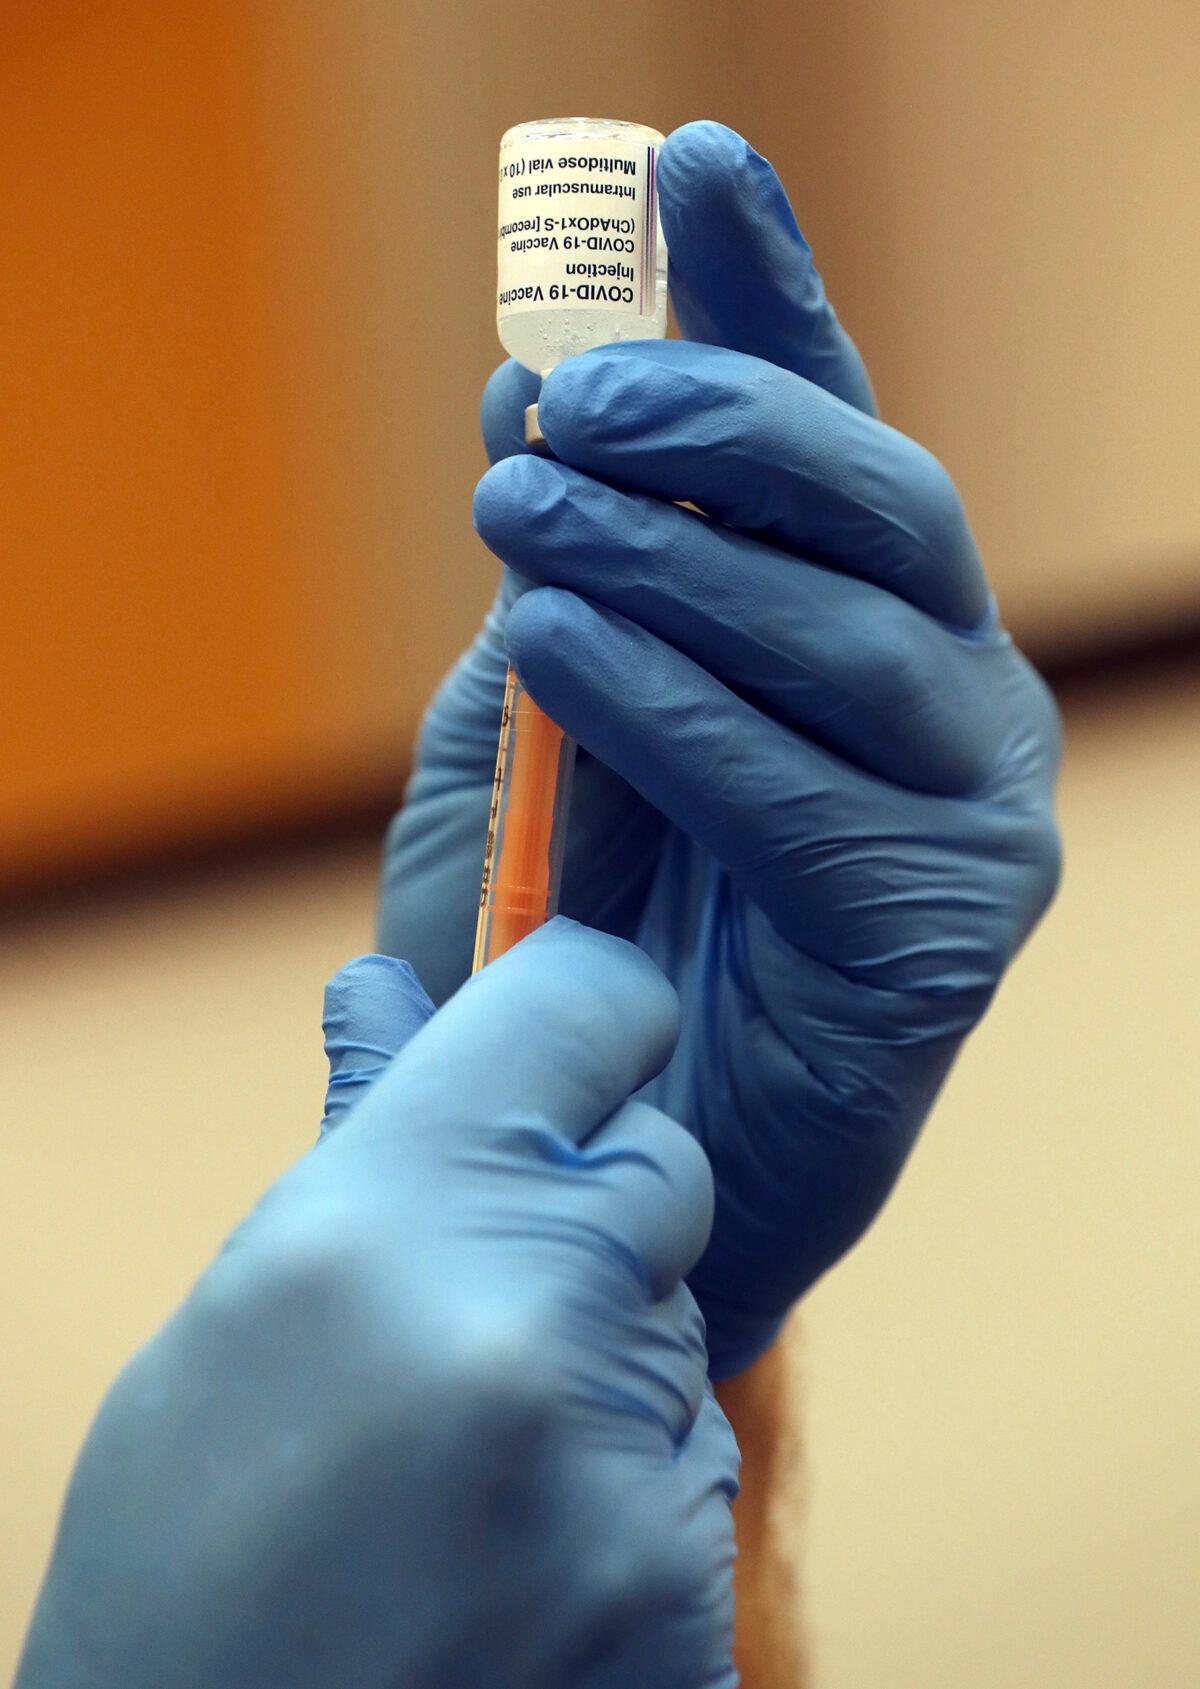 A paramedic draws a syringe of the Oxford/AstraZeneca vaccine at the mass vaccination center in Newcastle Upon Tyne, England, on Jan. 11, 2021. (Scott Heppell/AP Photo)